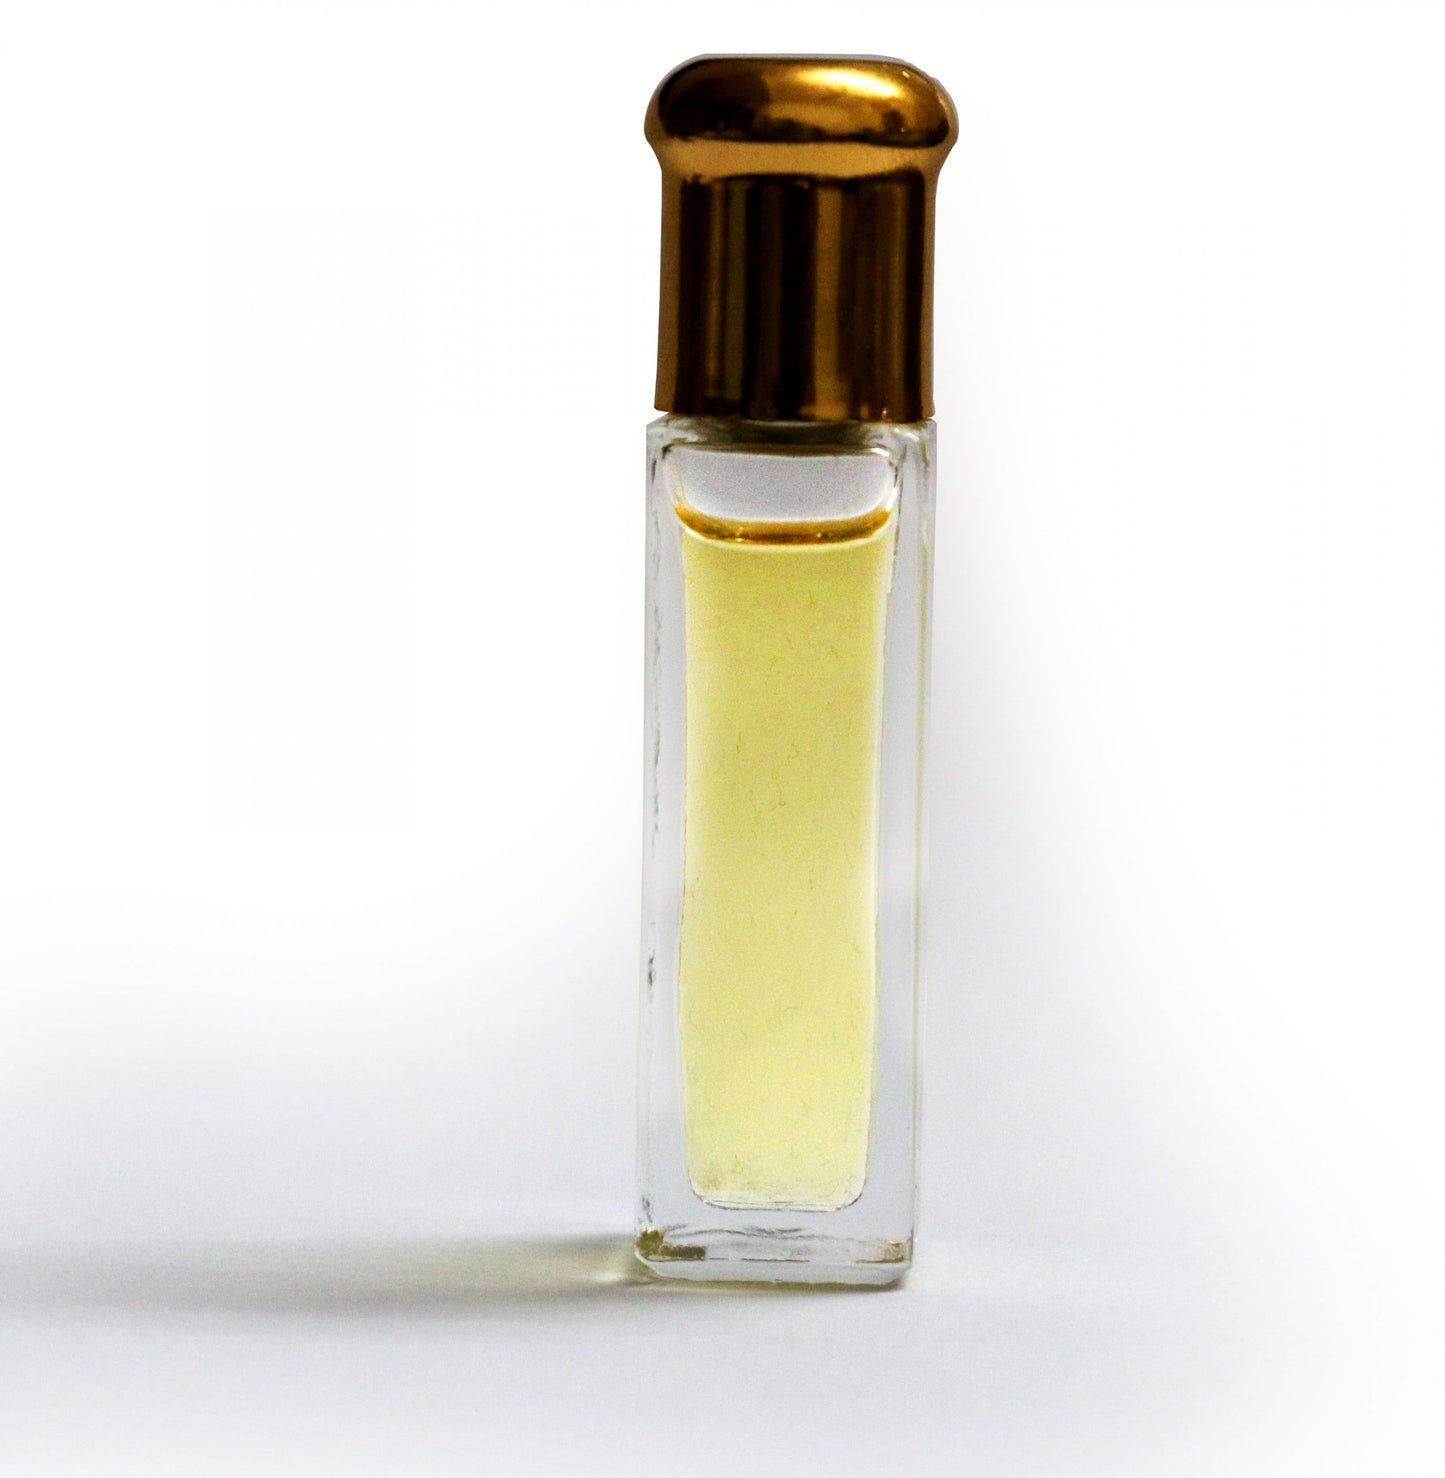 "SIBERIAN MUSK" PURE NATURAL ATTAR ONLY TO BE SOLD IN INDIA